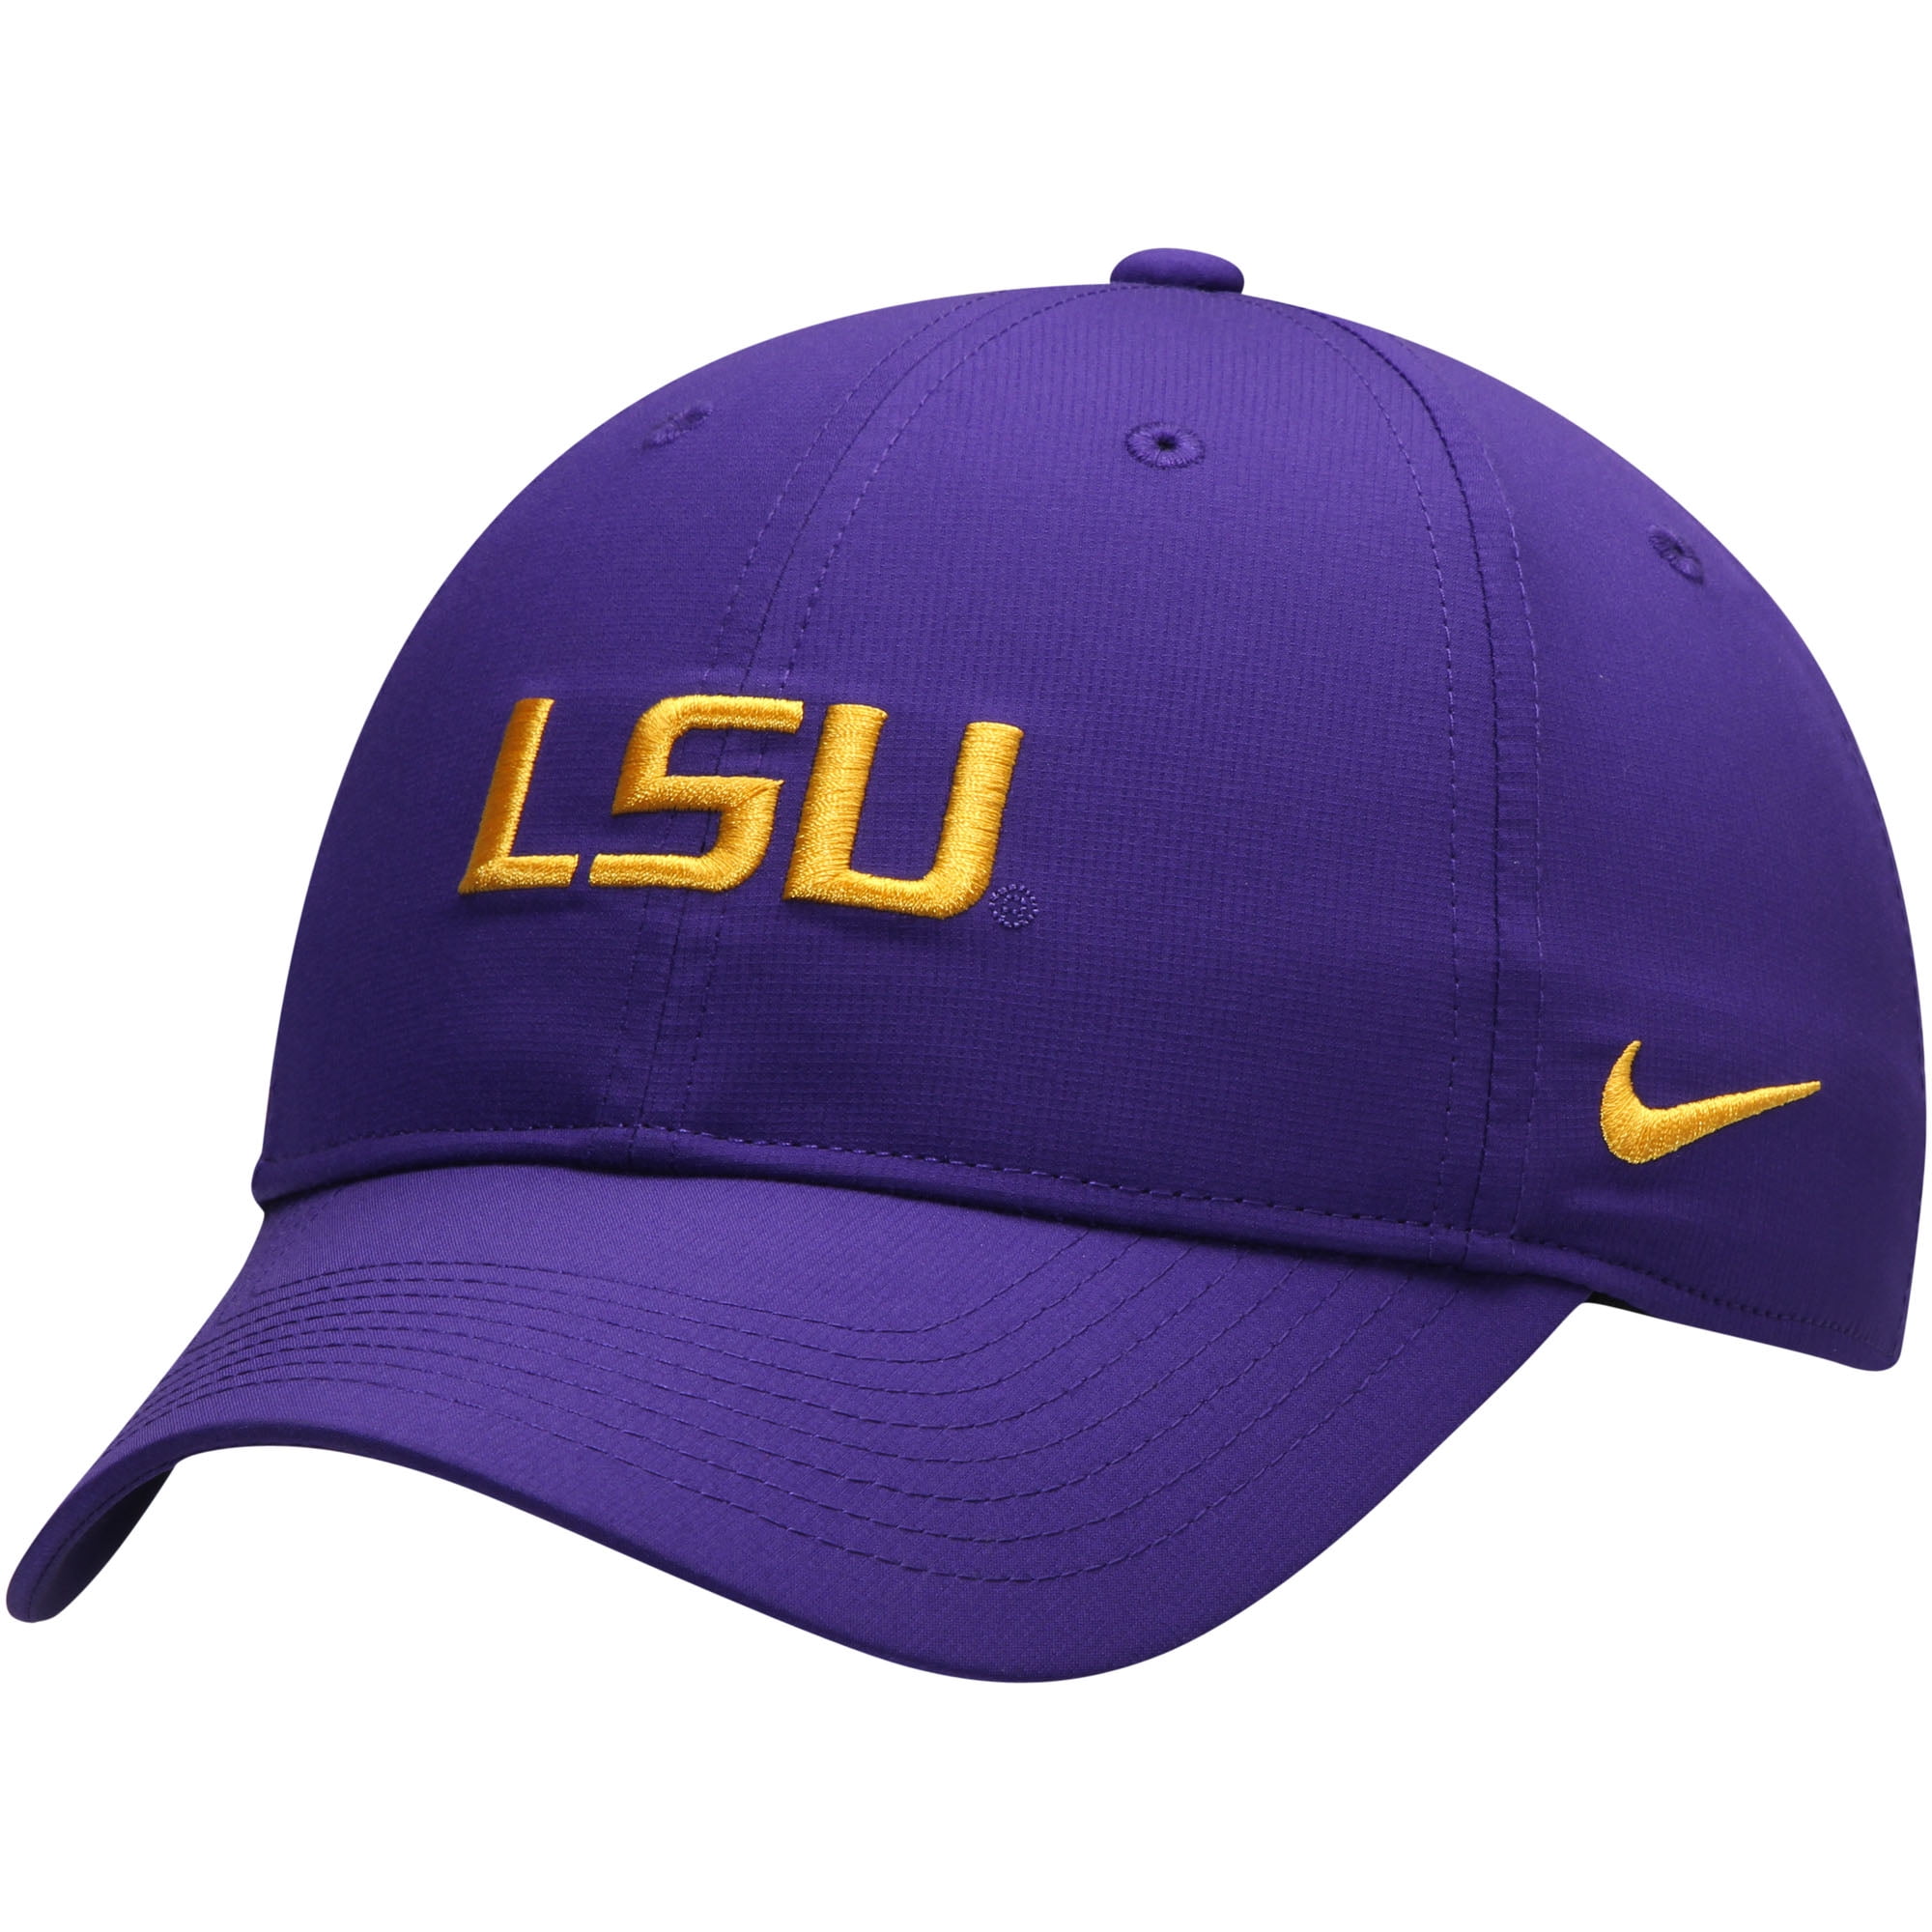 LSU Tigers Cap Embroidered White Logo Adjustable Acrylic Hat Color ...